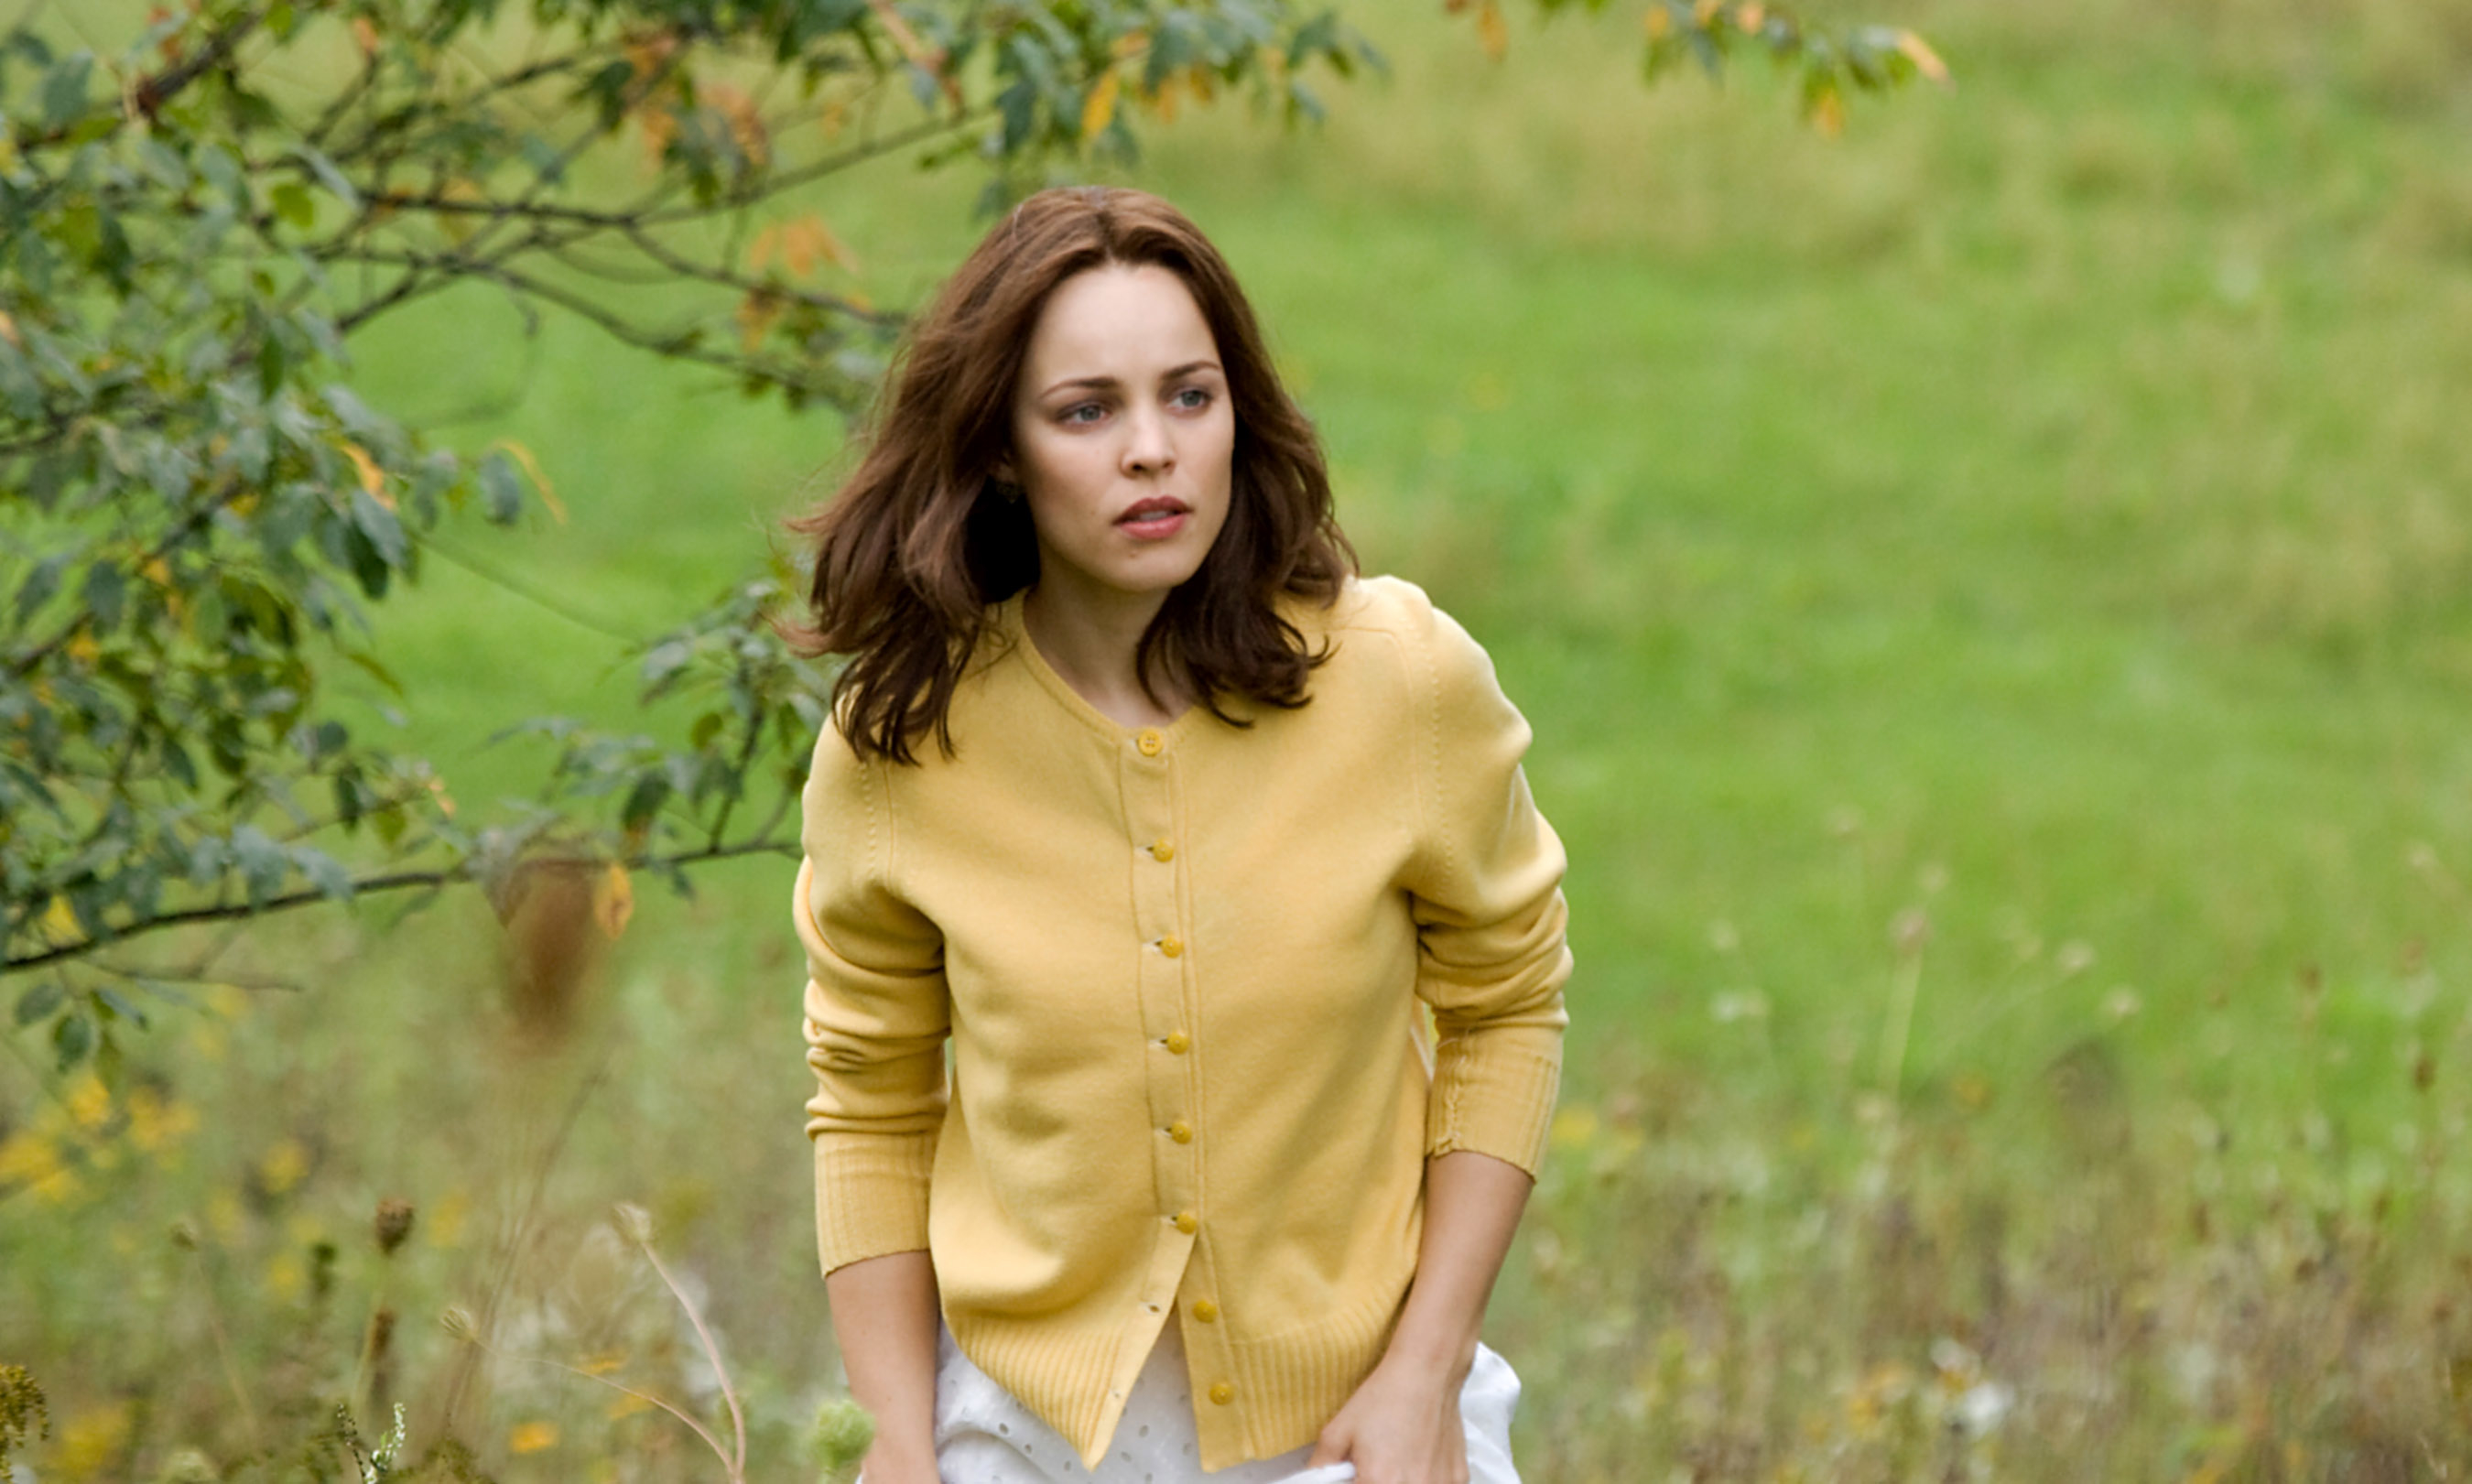 Clare wearing a cardigan and skirt, looking pensive in a field